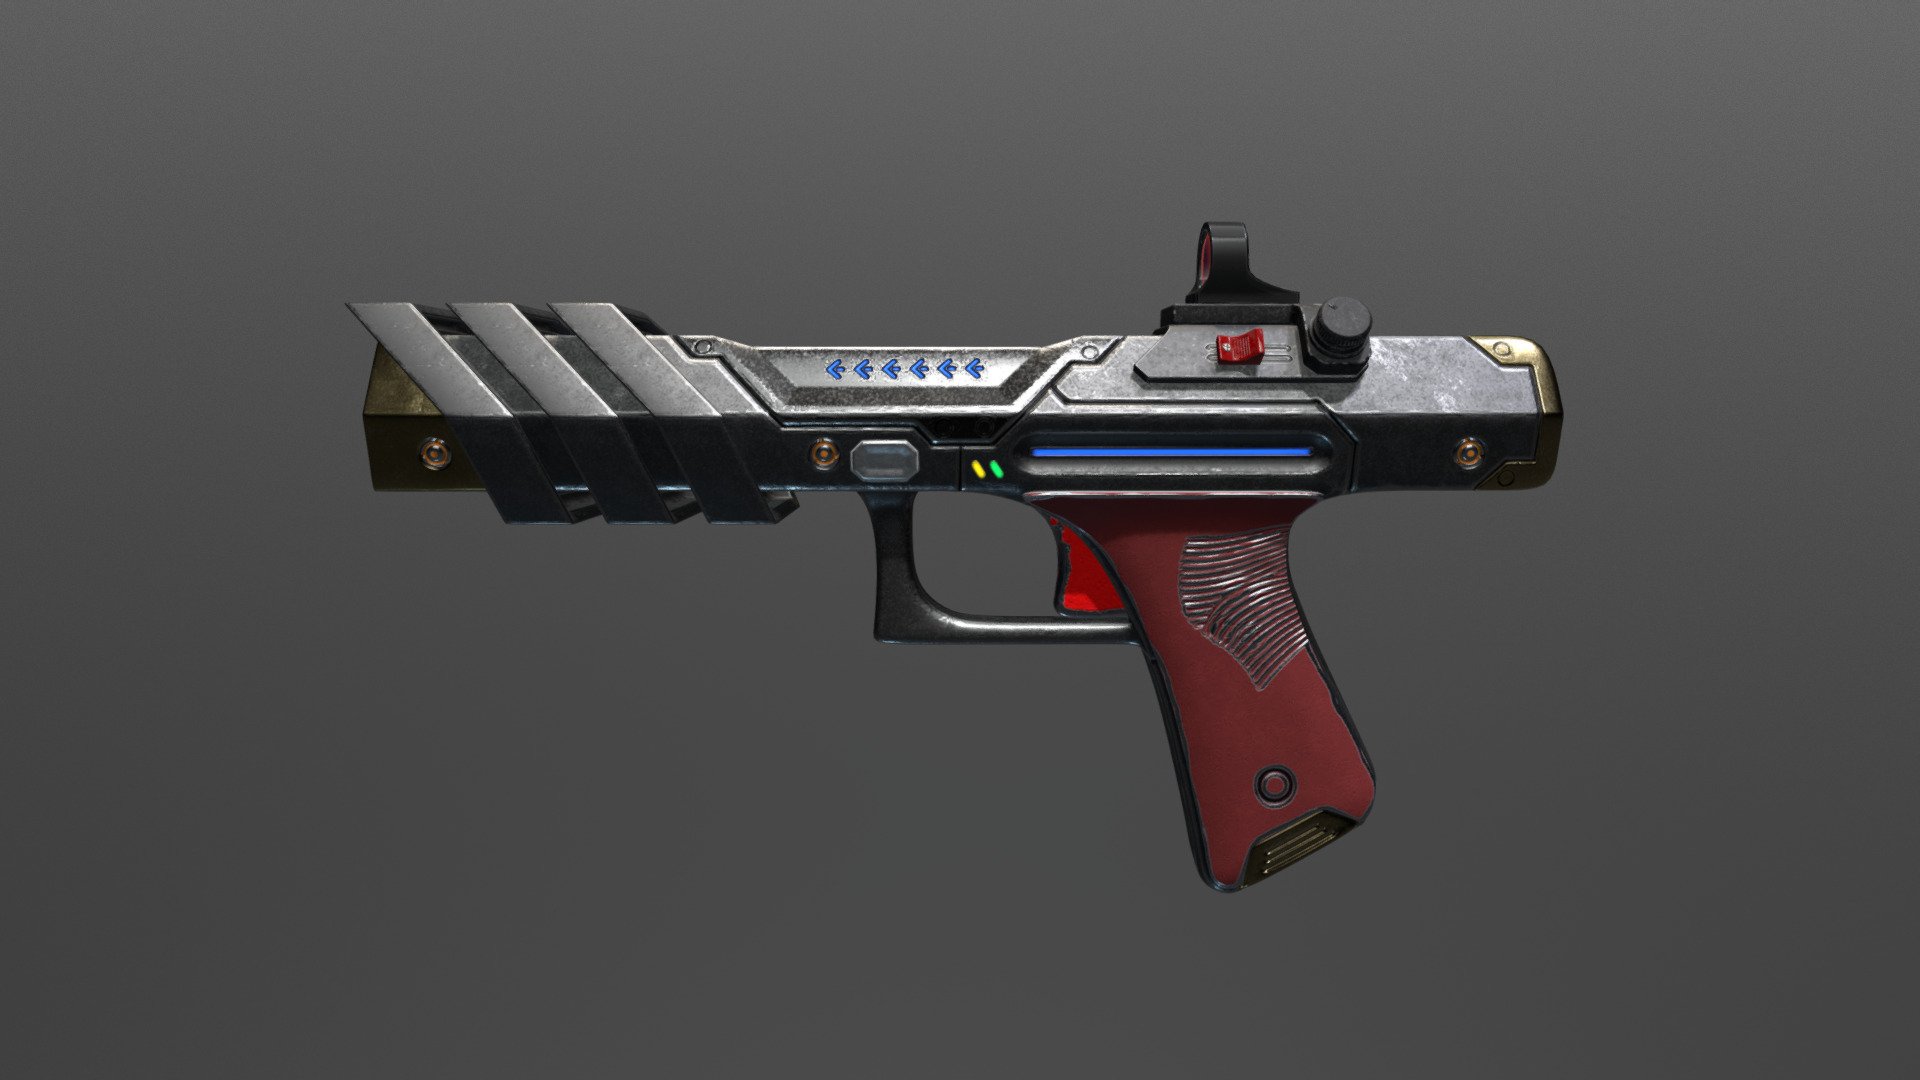 Personal project - hardsurface model of pulse laser SciFi handgun, with self-destruct function clip. I tried to achieve the balance between realistic style and fiction 3d model